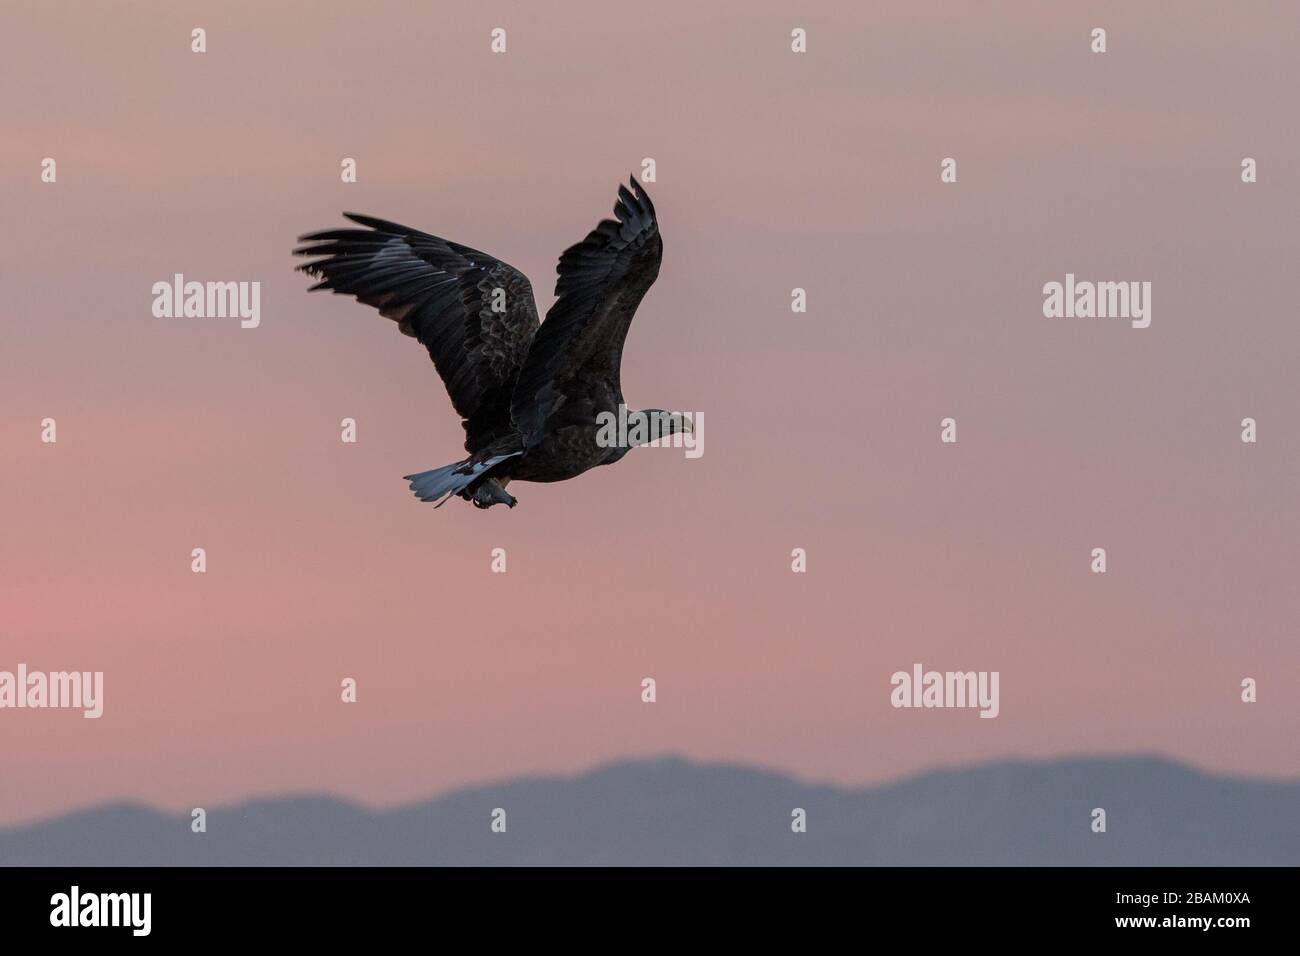 White-tailed eagle in flight, eagle flying against colorful sky with clouds in Hokkaido, Japan, silhouette of eagle at sunrise, majestic sea eagle, wi Stock Photo